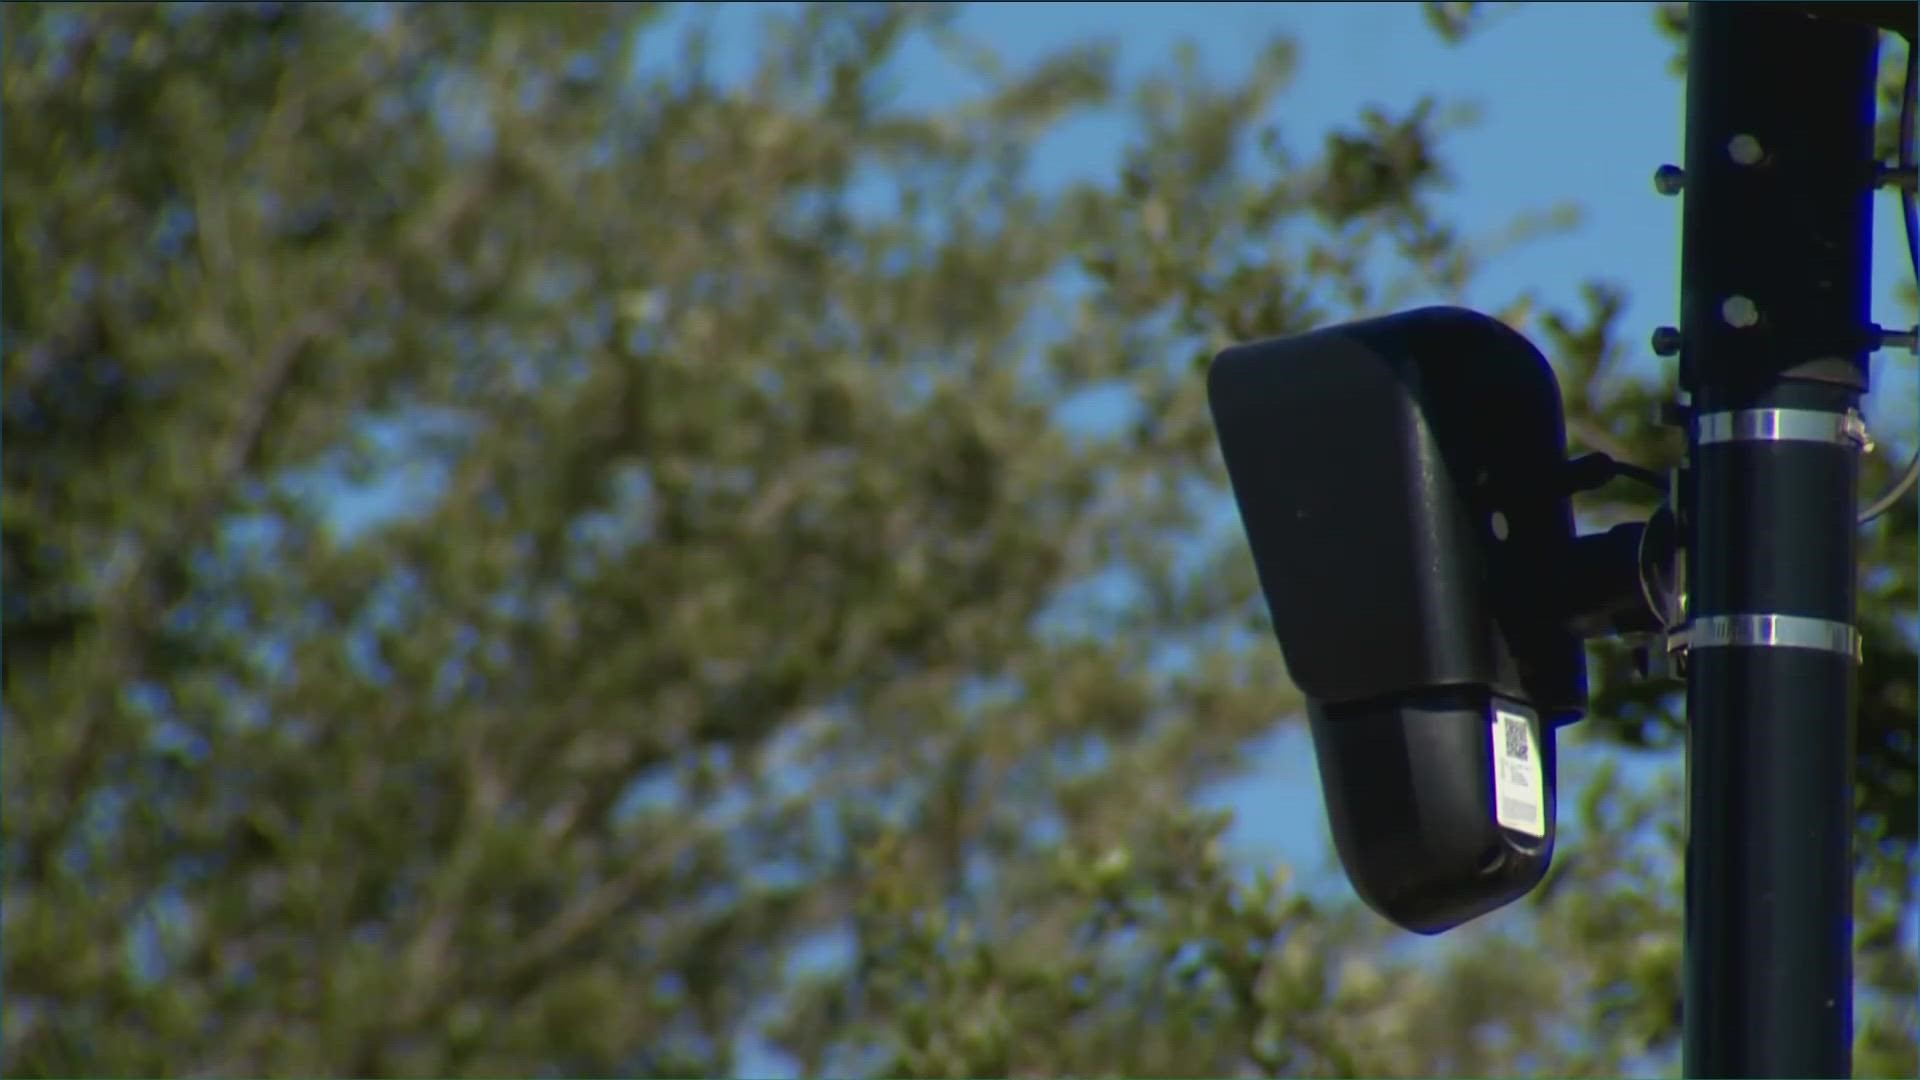 Austin police officers are meeting with the community to explain more about reinstating license plate readers in the city.